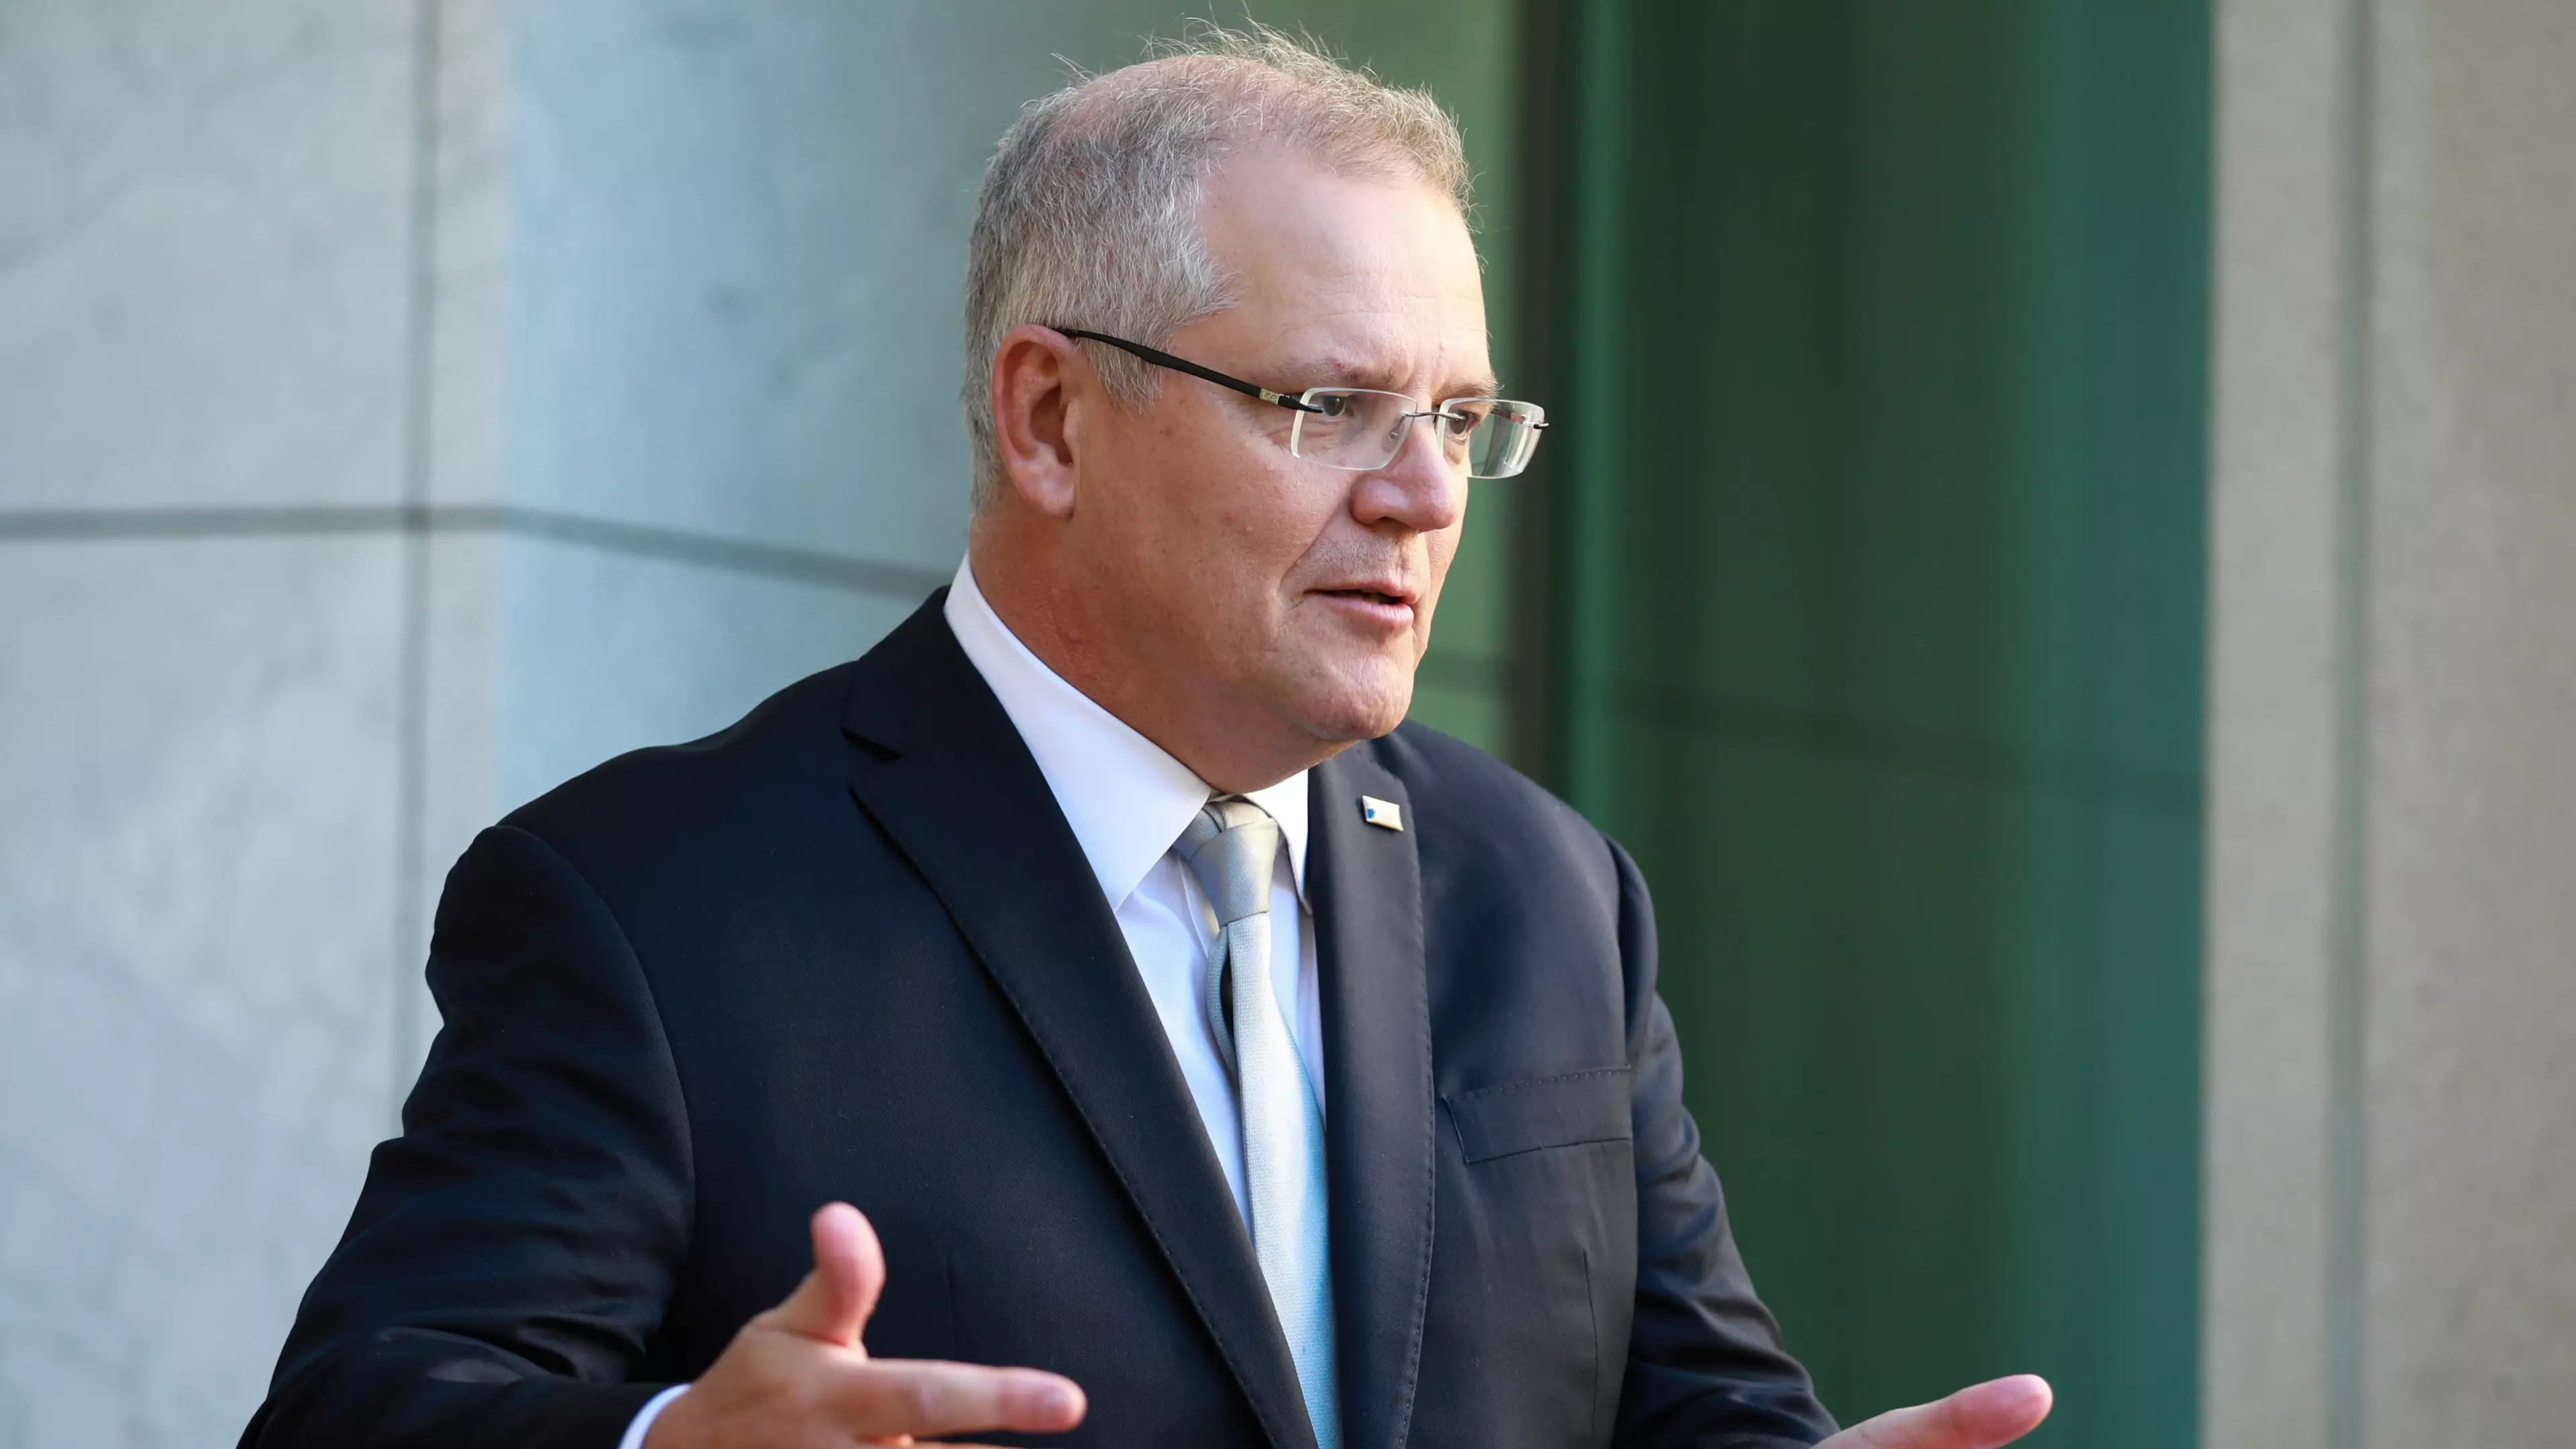 Scott Morrison Says Nearly All Domestic Borders Will Be Opened By Christmas